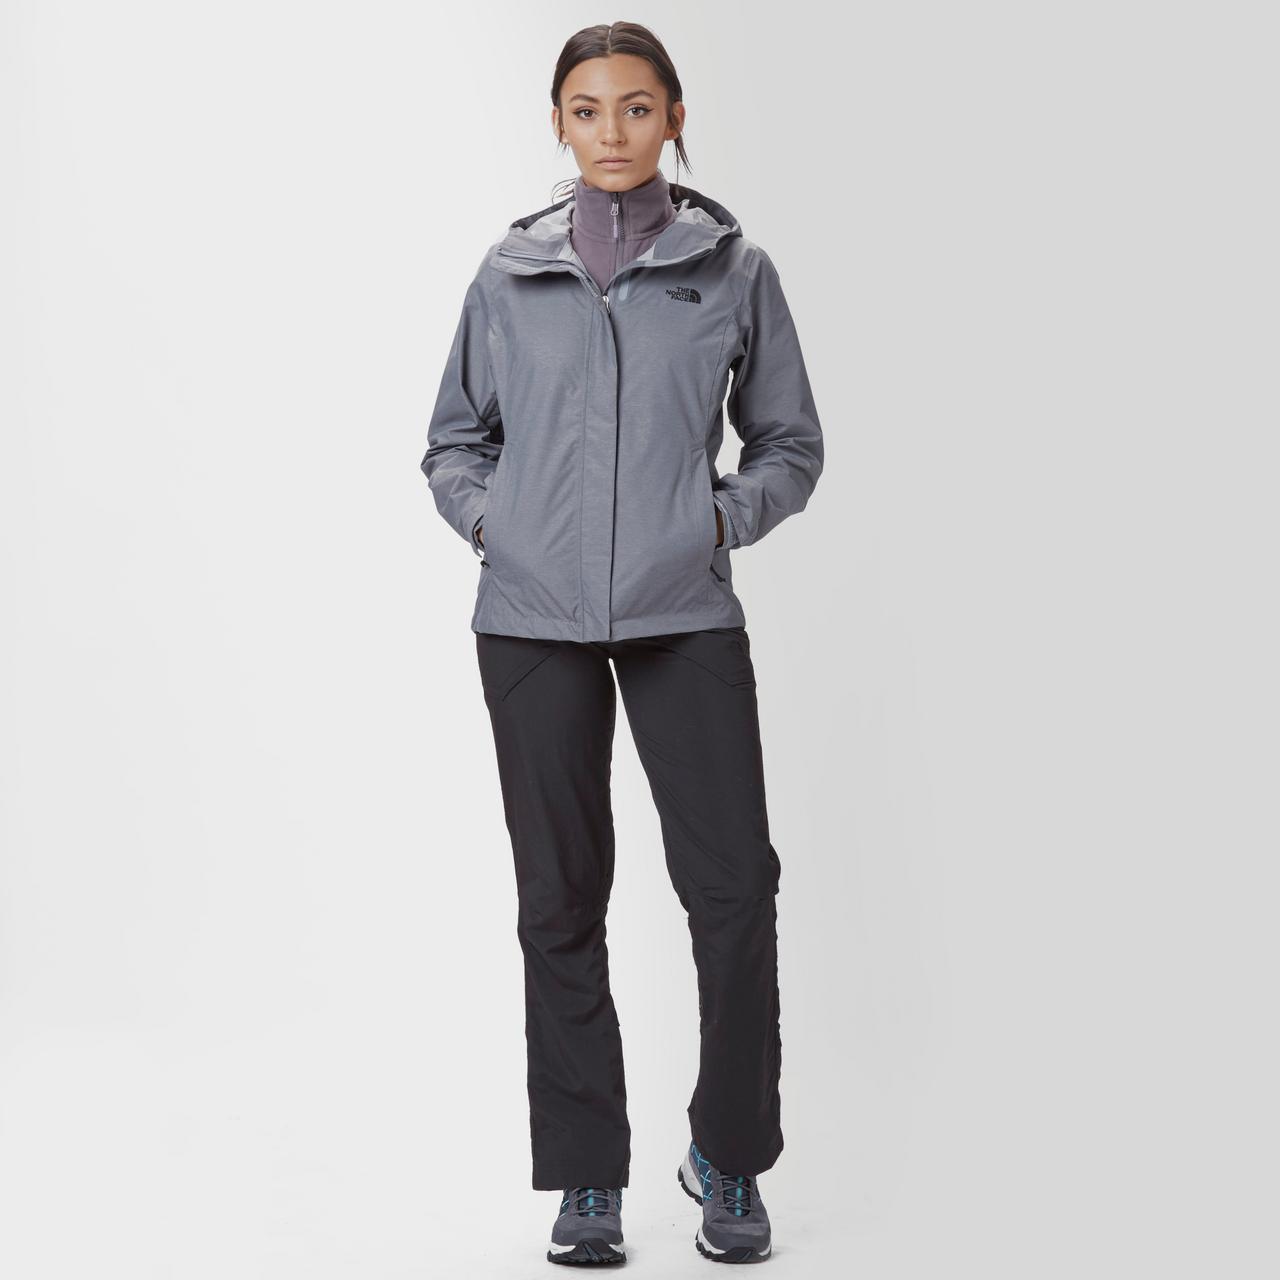 The North Face Women’s Venture 2 DryVent® Jacket The North Face ktmart 1